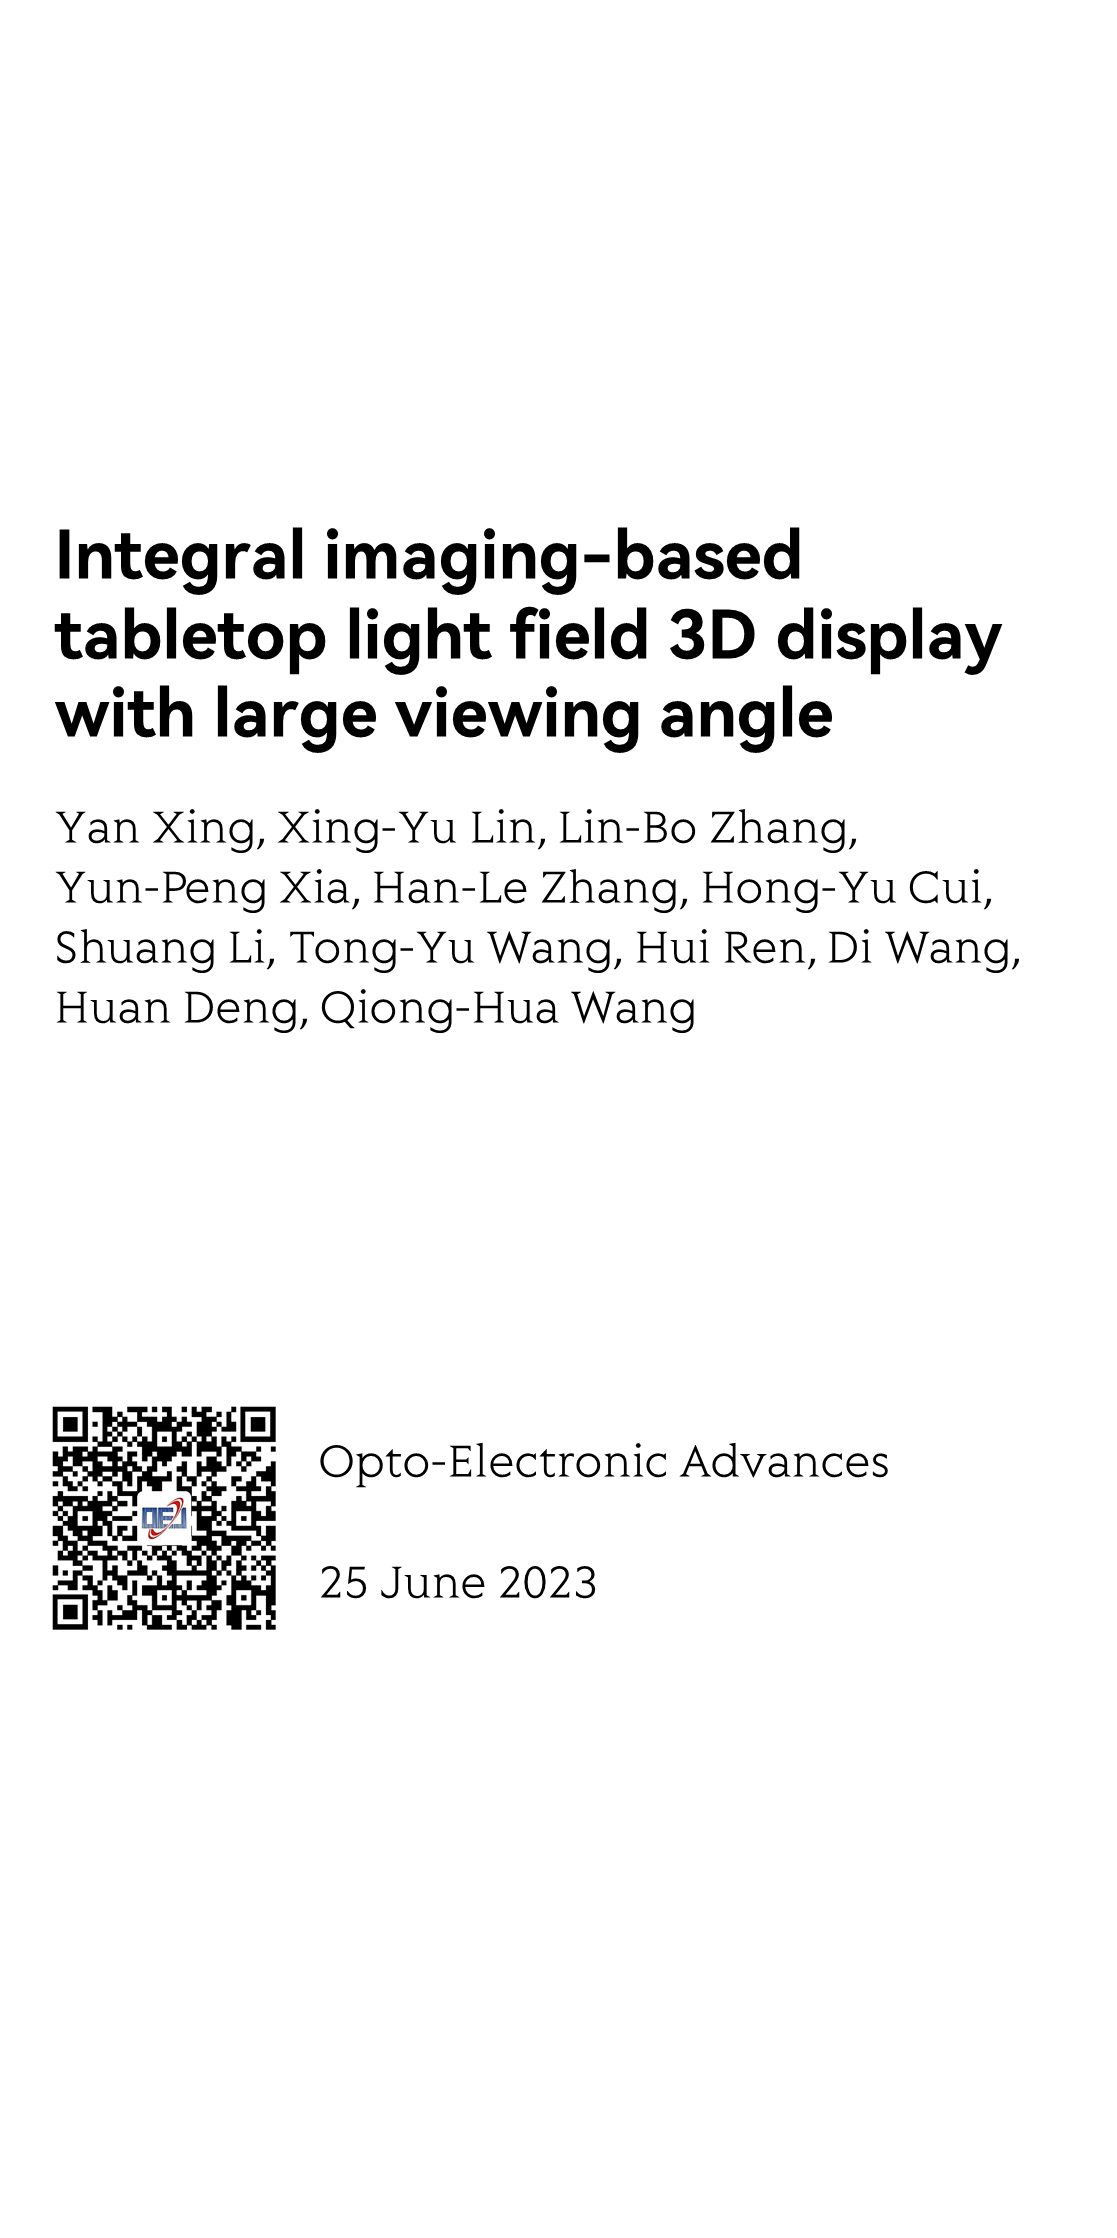 Integral imaging-based tabletop light field 3D display with large viewing angle_1